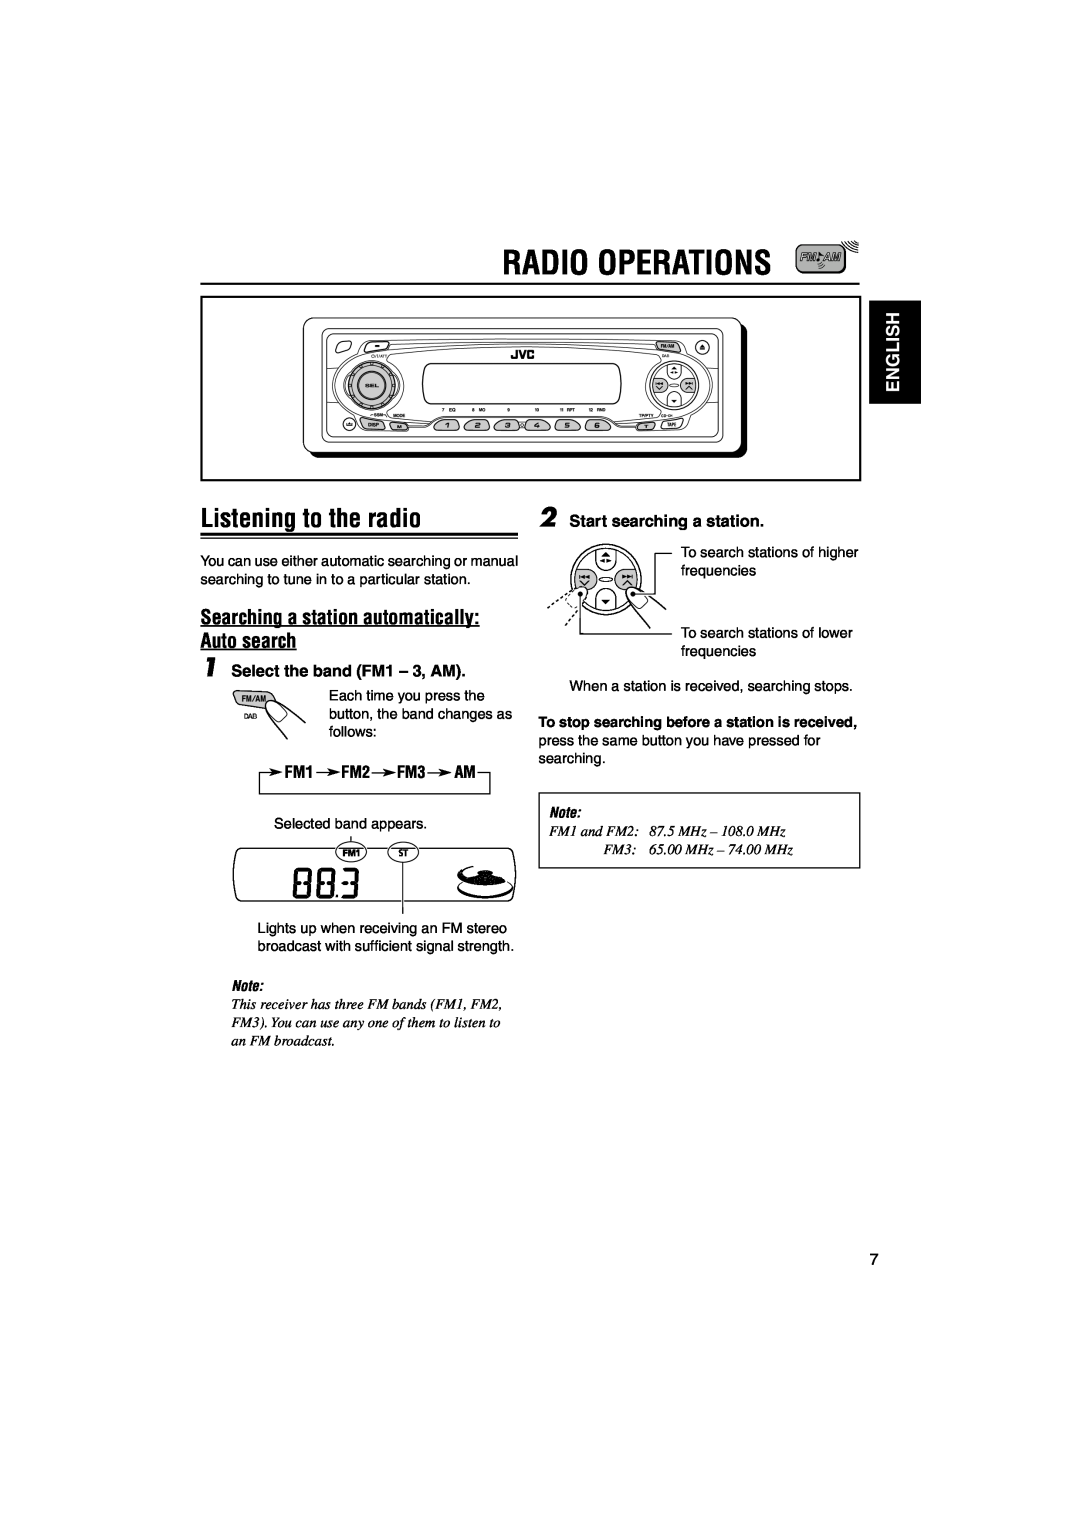 JVC KS-FX845R manual Radio Operations, Listening to the radio, Searching a station automatically Auto search, English 